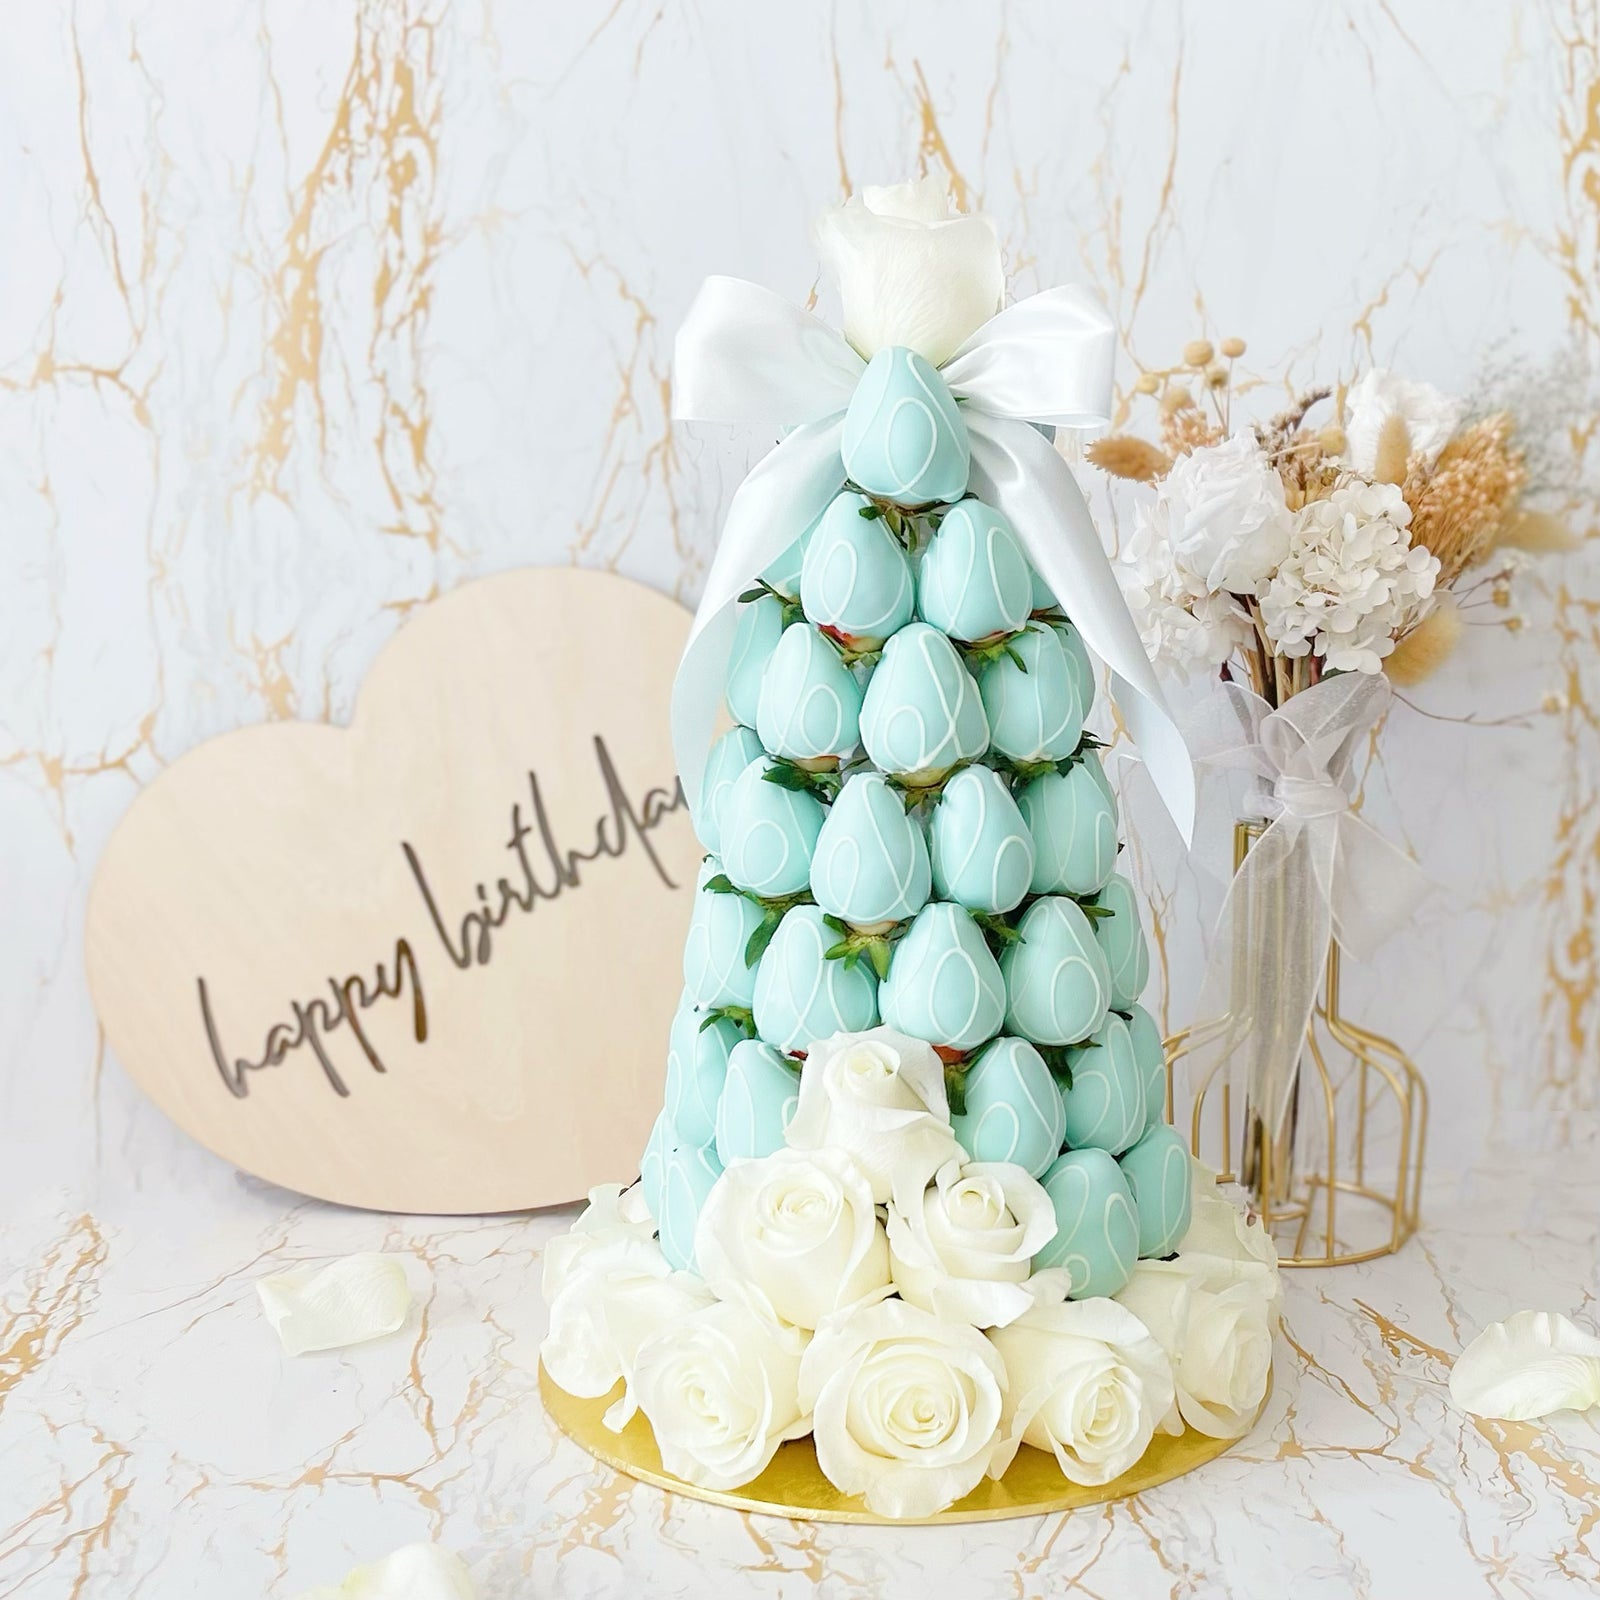 Tiffany Blue Strawberry Tower | Fresh Fruit Arrangement with Chocolate Dipped Strawberry & Rose Flower Arrangements - Rainbowly Fresh Fruit Gift and Flower Arrangments